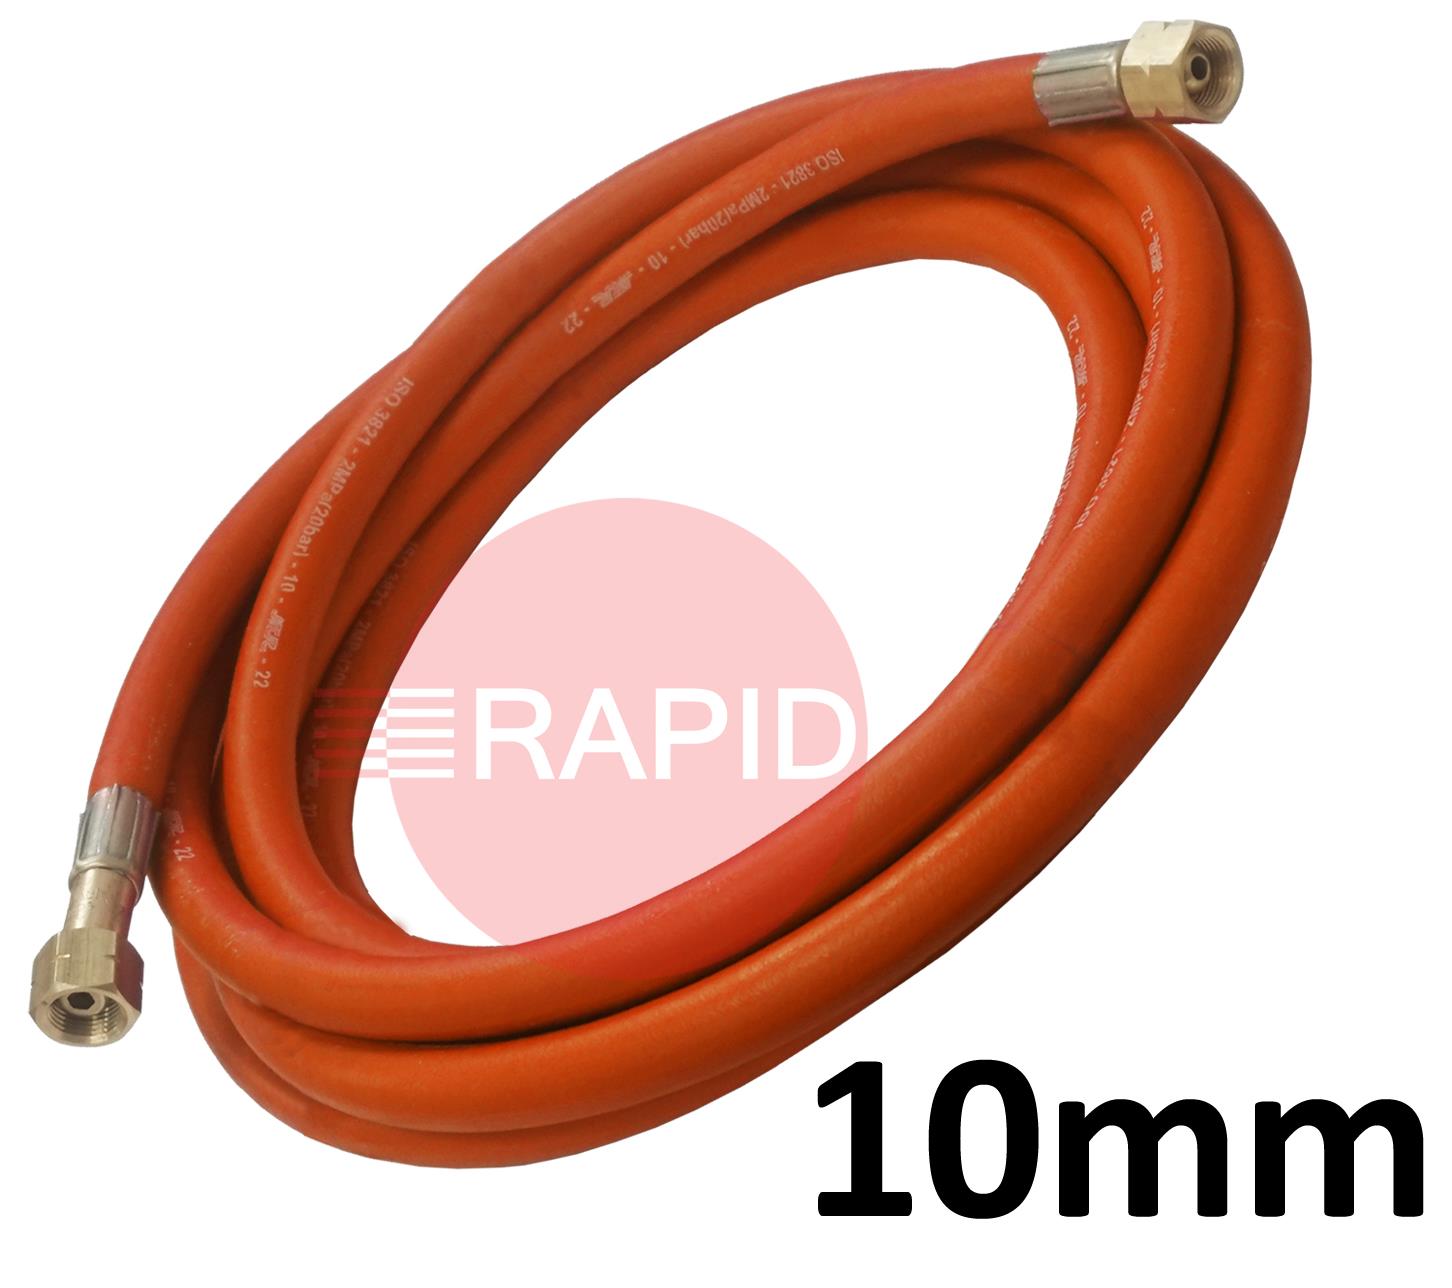 A5132  Fitted Propane Hose. 10mm Bore. G3/8 Check Valve & G3/8 Regulator Connection - 5m